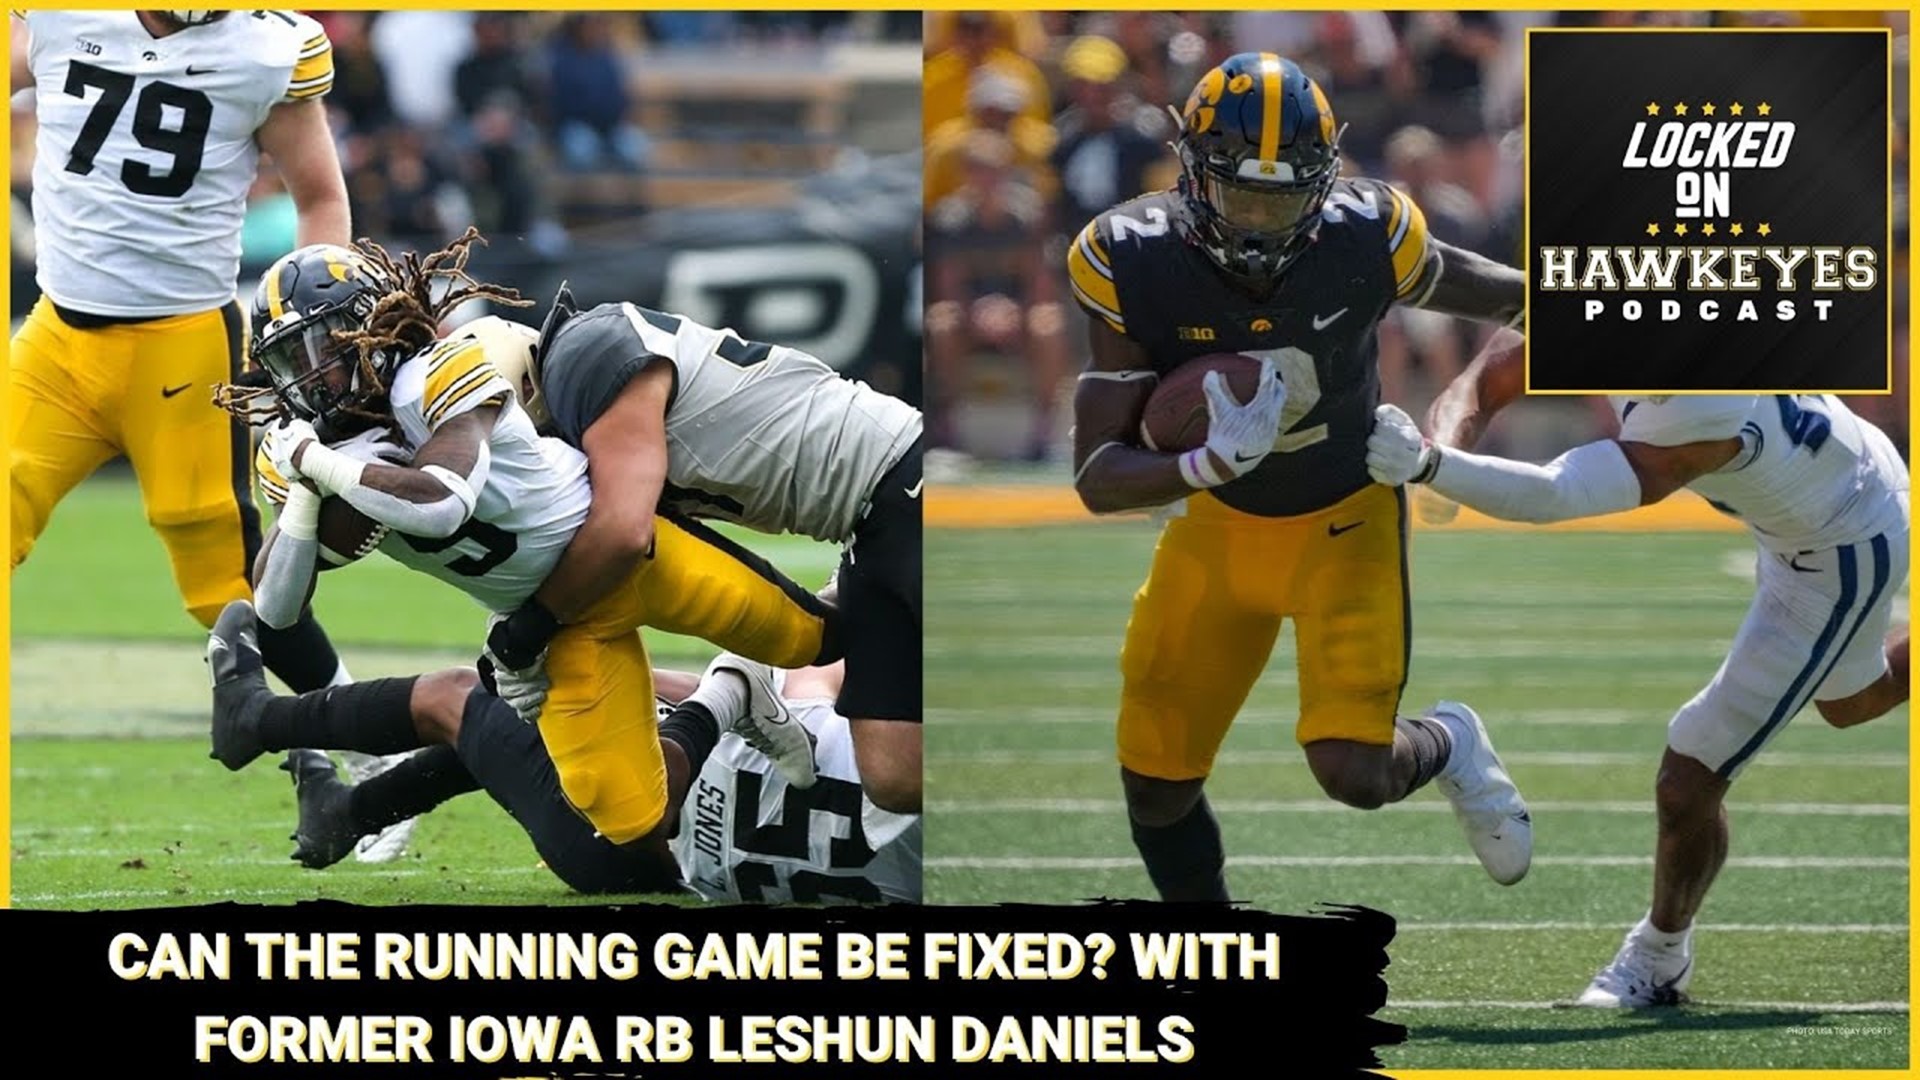 Iowa Football: What can be done to fix the running game with former Iowa running back LeShun Daniels